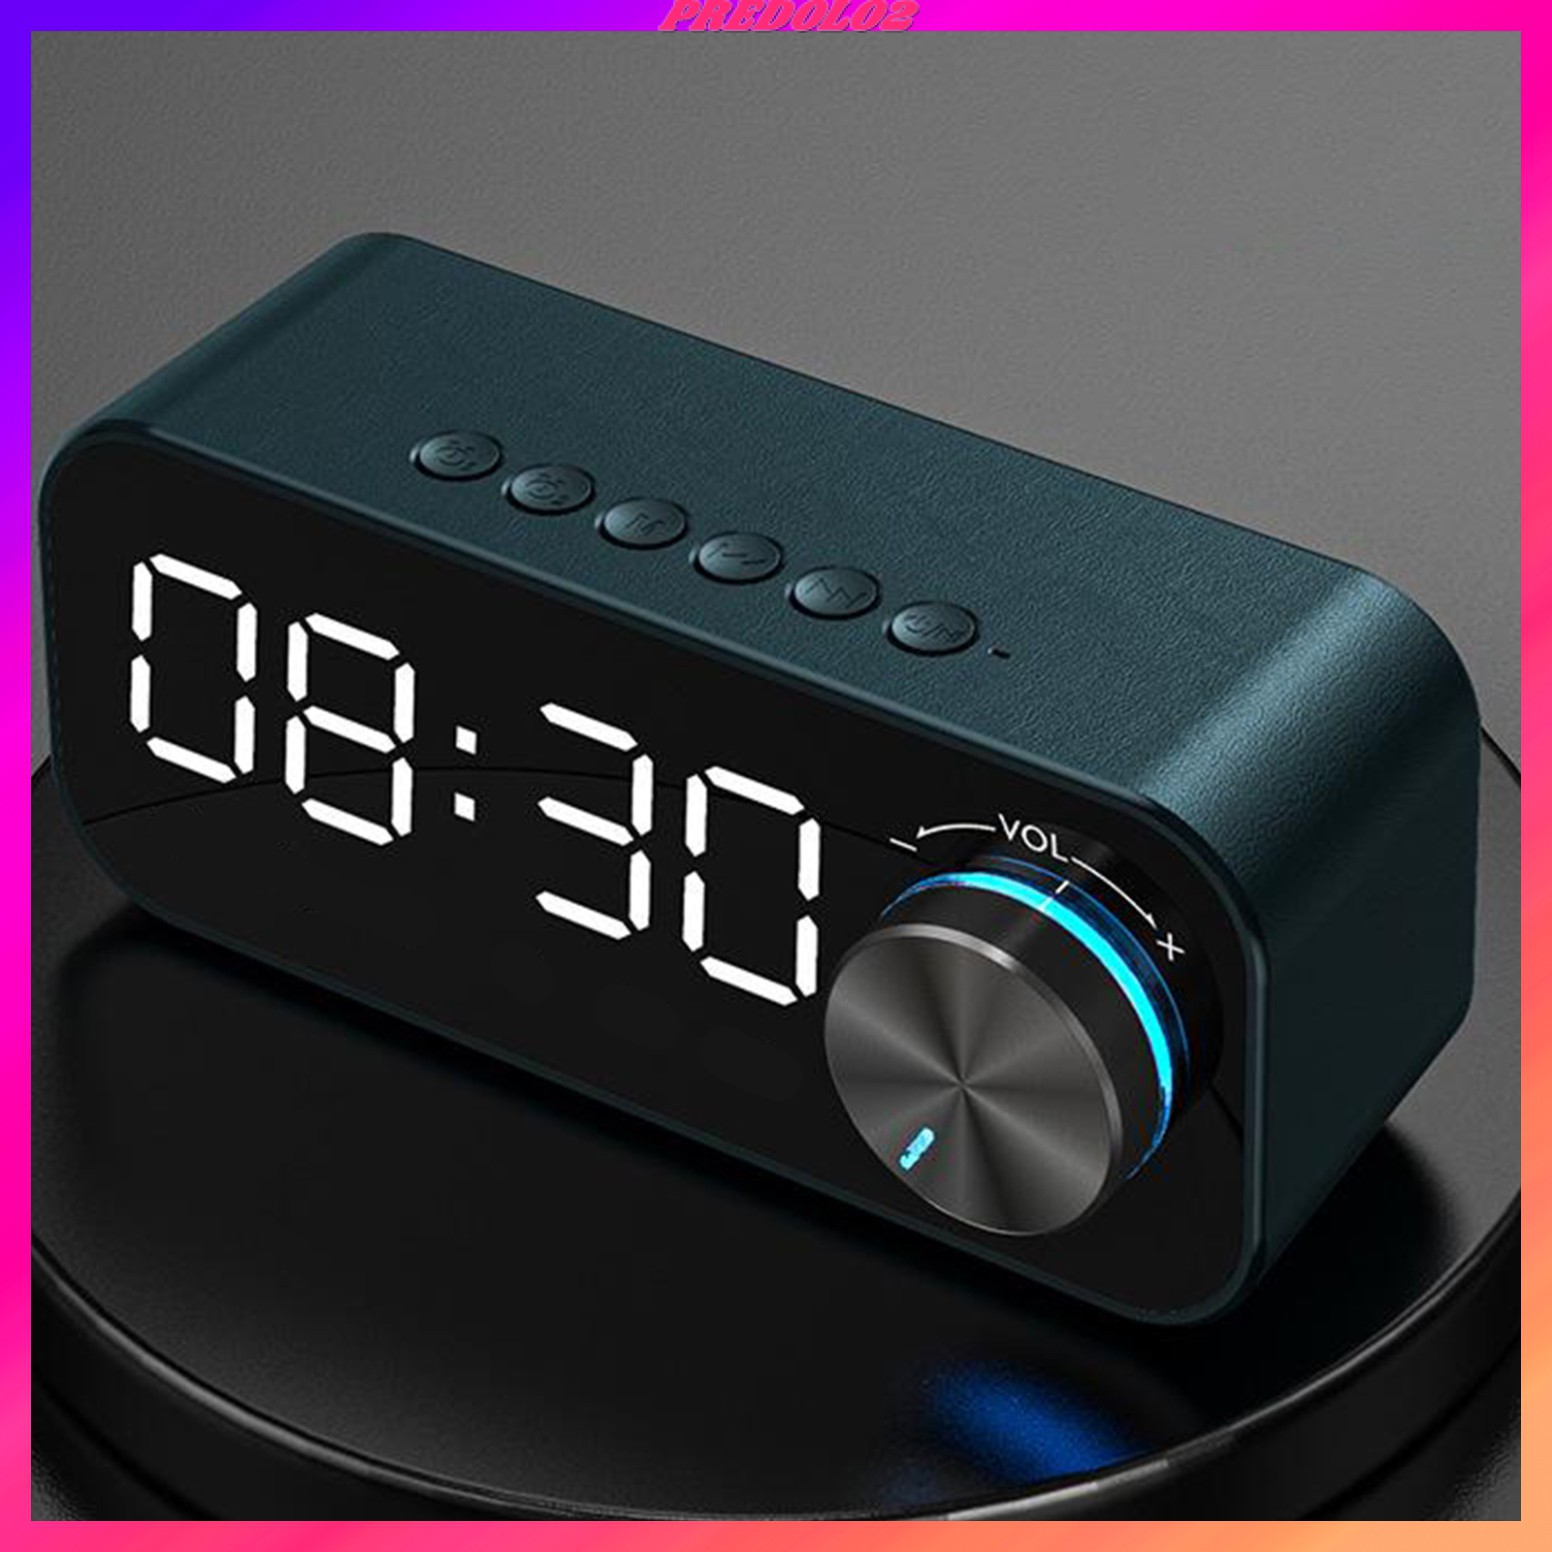 igital Alarm Clock Bedside with Bluetooth 5.0 Speaker, Sleep Timer, Snooze Function, Led Mirror Screen, ual Alarms,and USB Charge Port